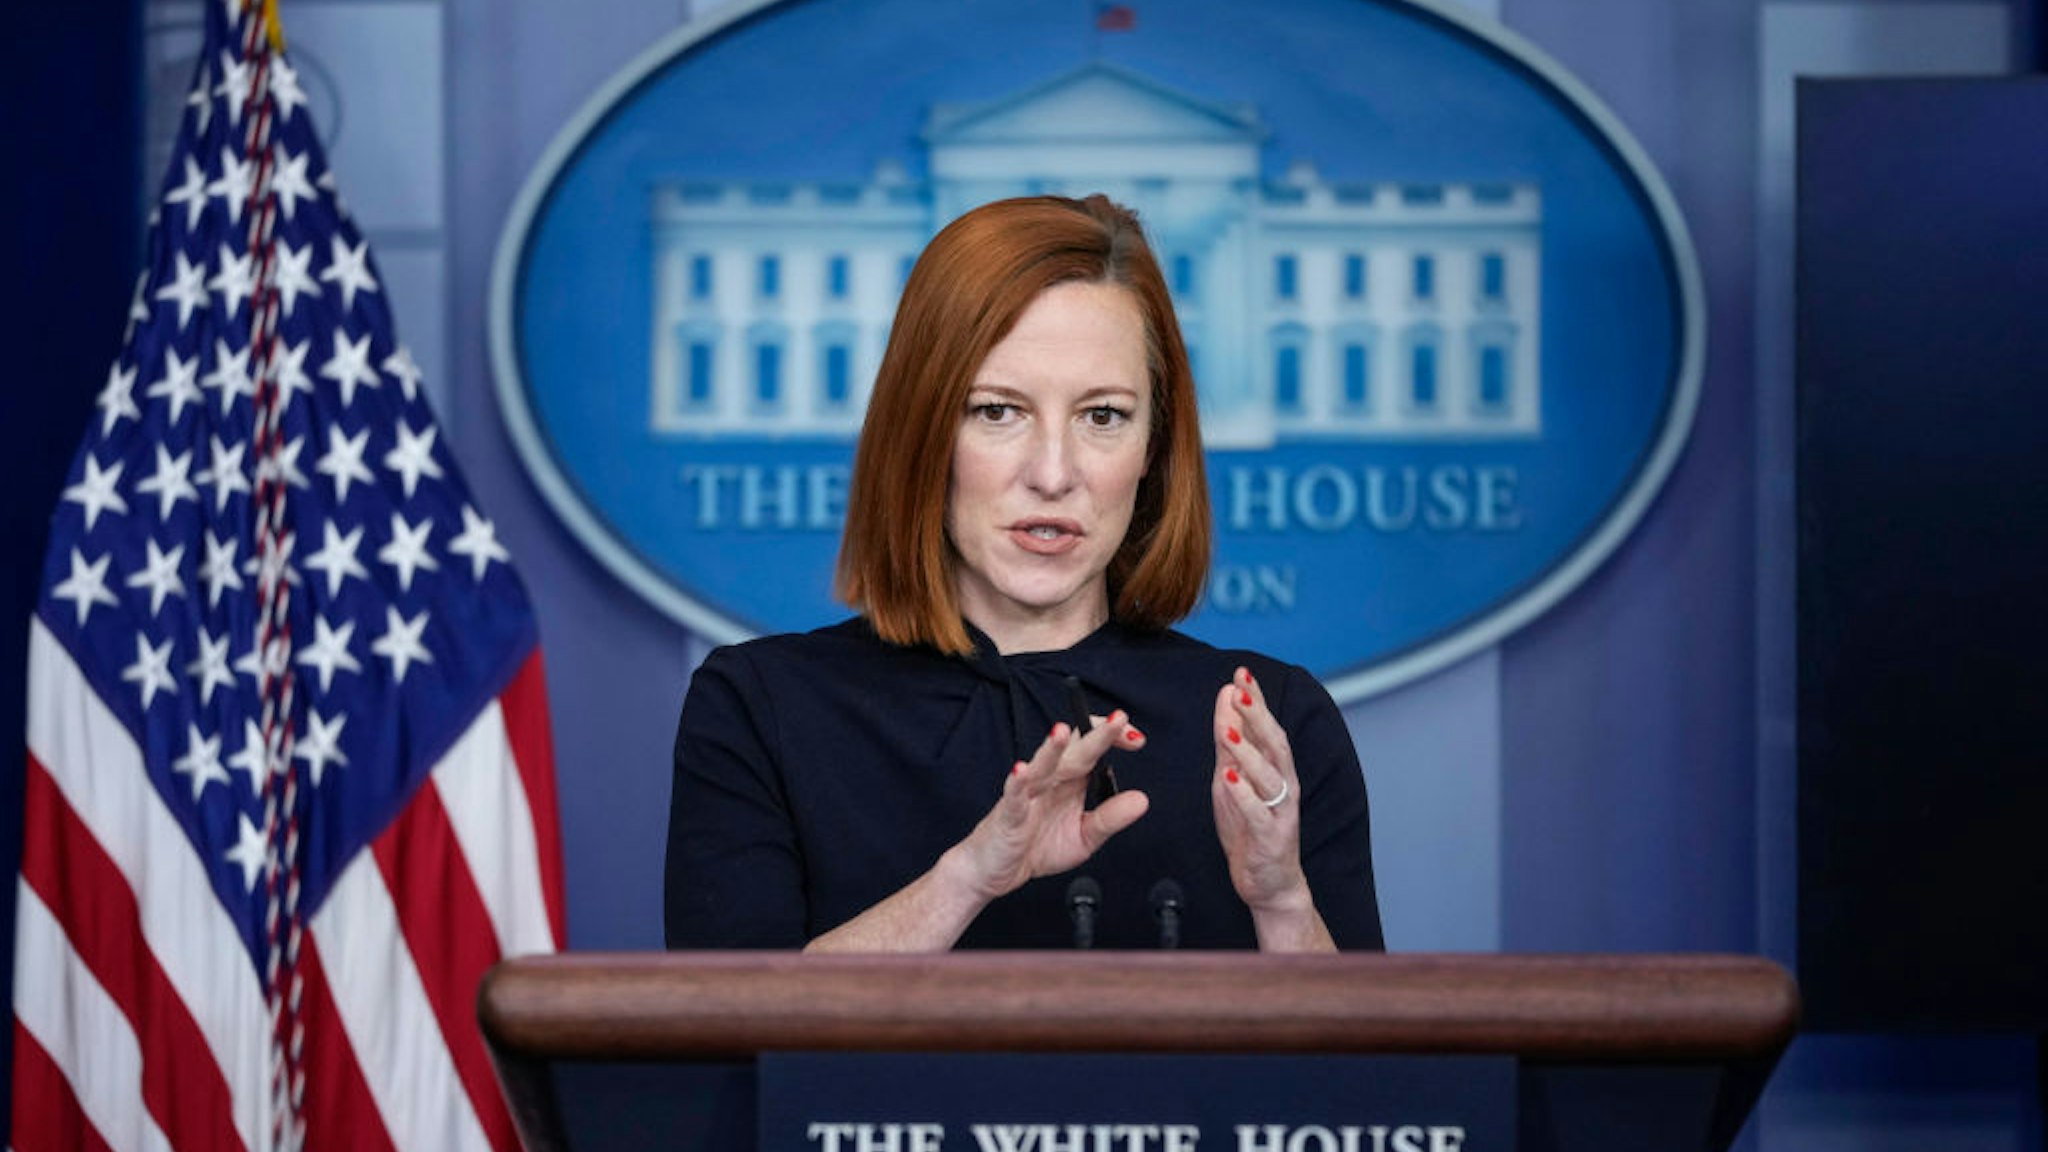 WASHINGTON, DC - DECEMBER 22: White House Press Secretary Jen Psaki speaks during the daily press briefing at the White House December 22, 2021 in Washington, DC. Earlier on Wednesday, President Biden spoke on measures the White House is using to mitigate supply chain bottlenecks, incentivizing new truck driver hirings and expanding domestic production. (Photo by Drew Angerer/Getty Images)